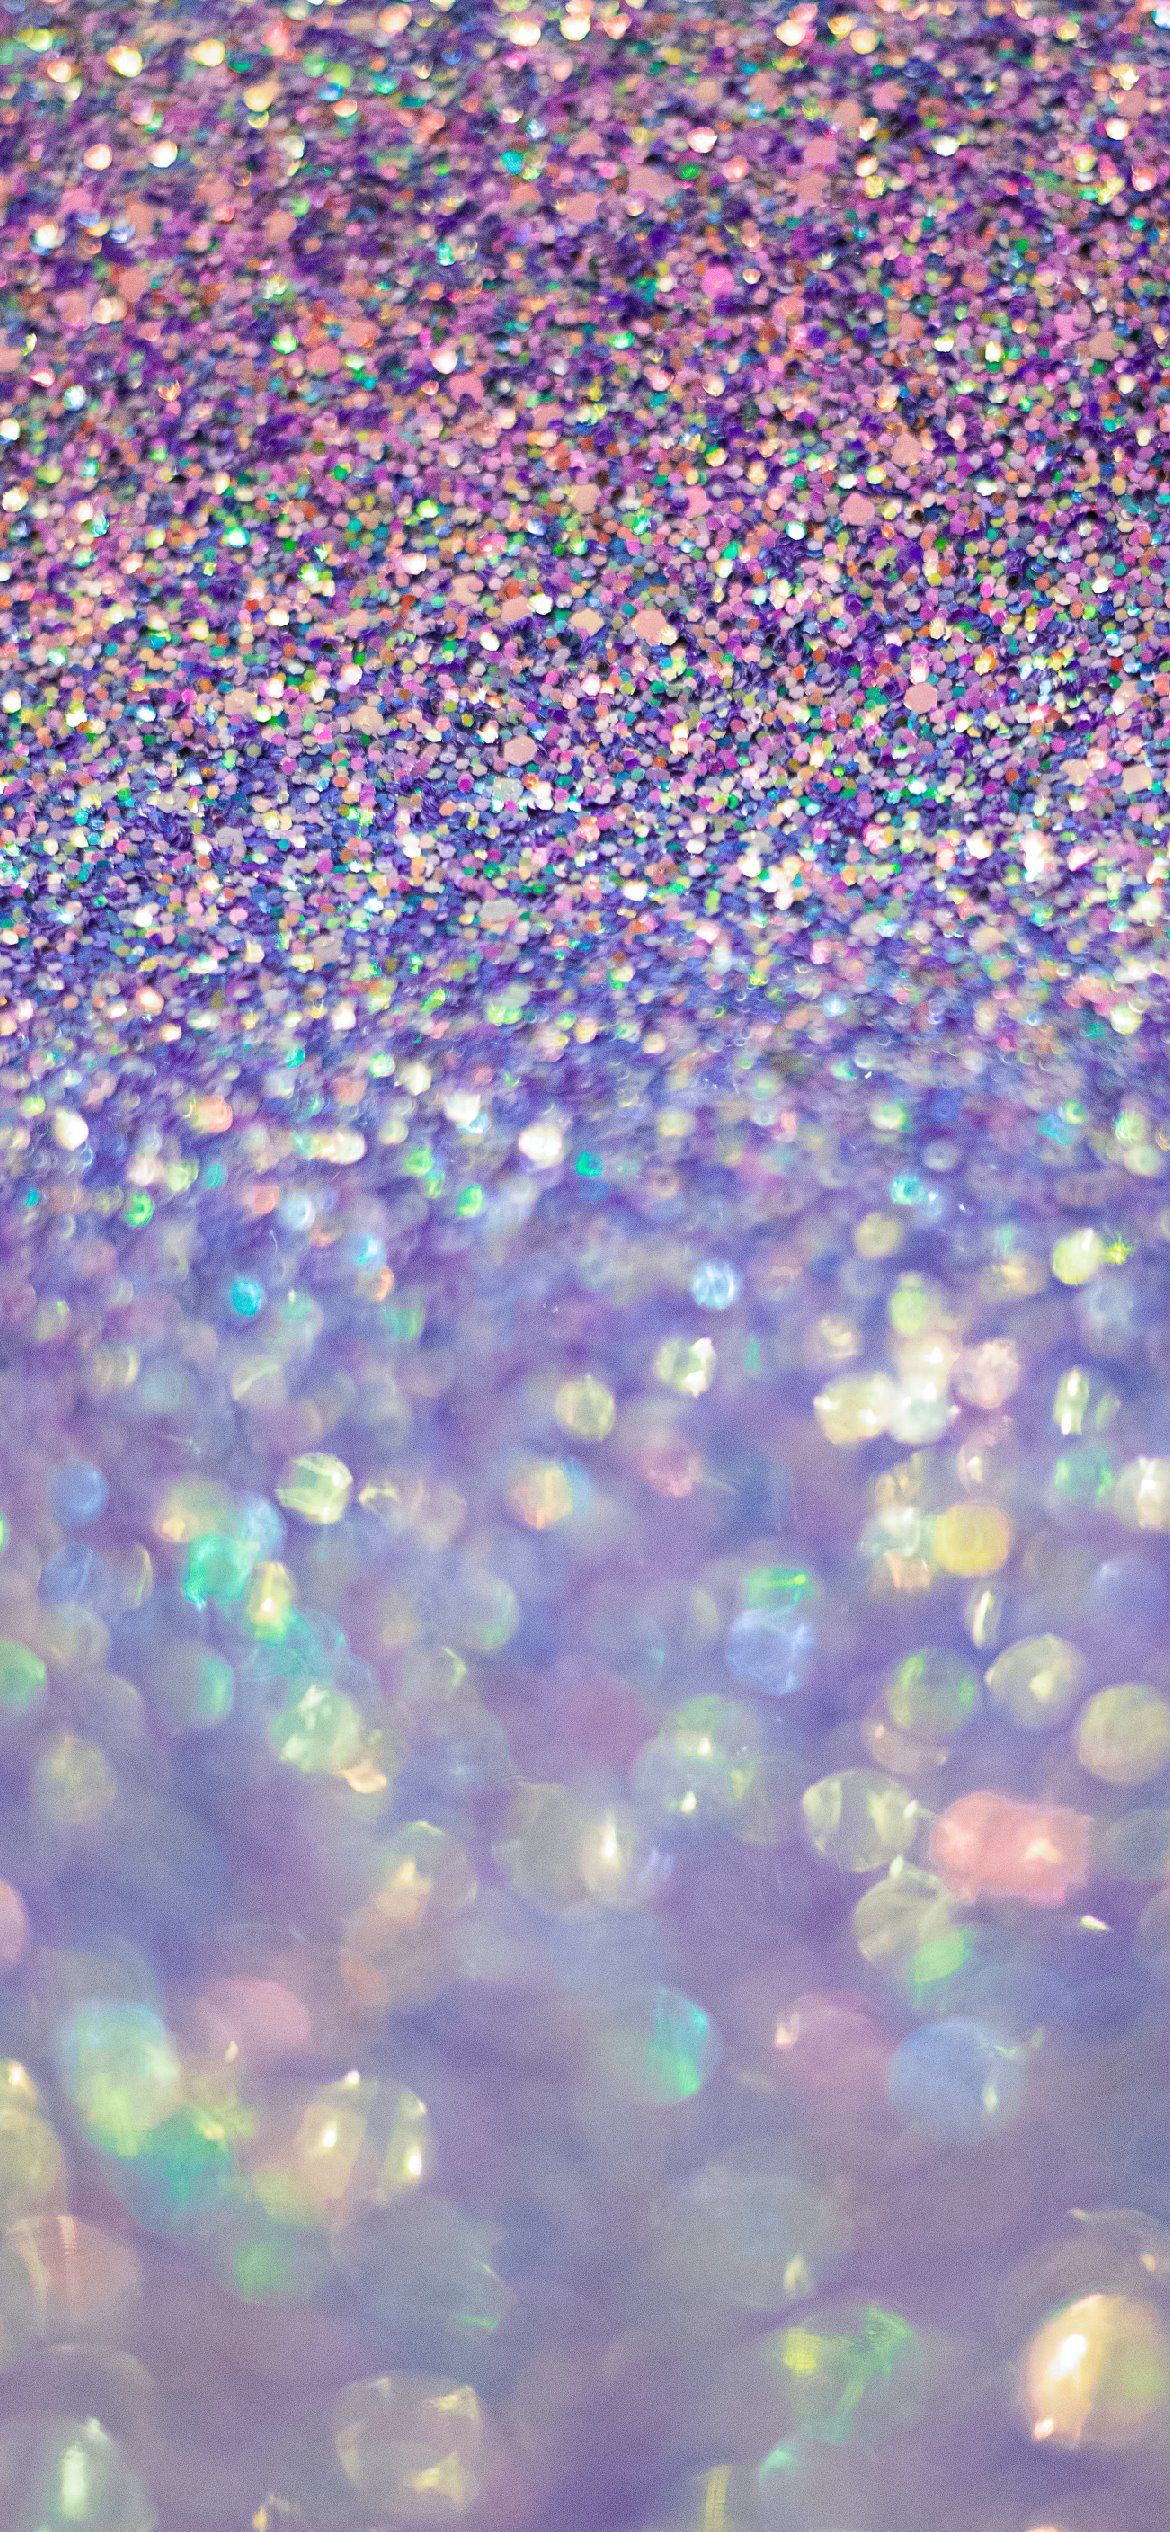 A close up of a pile of purple and blue glitter. - Purple, colorful, cute purple, violet